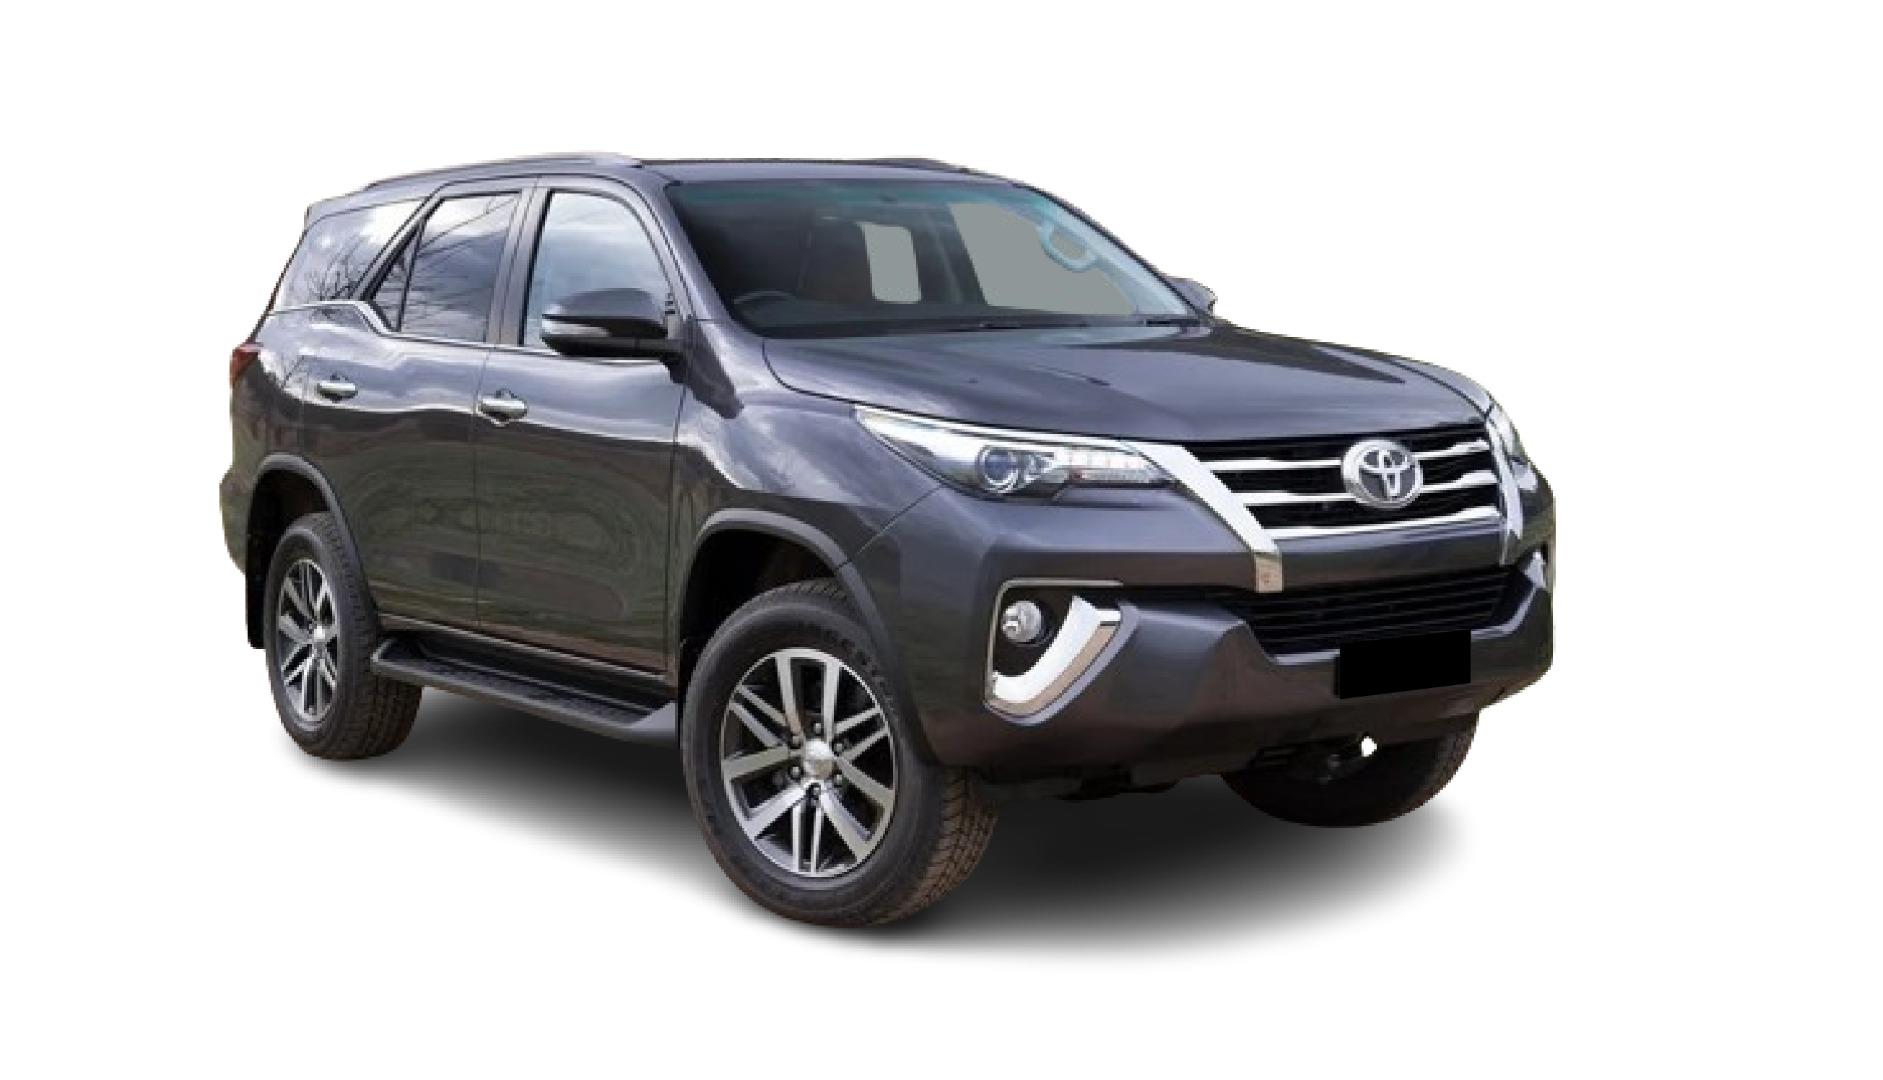 2018 Toyota Fortuner My18 2.8 Gd-6 Raised bodytype At for sale - 343376